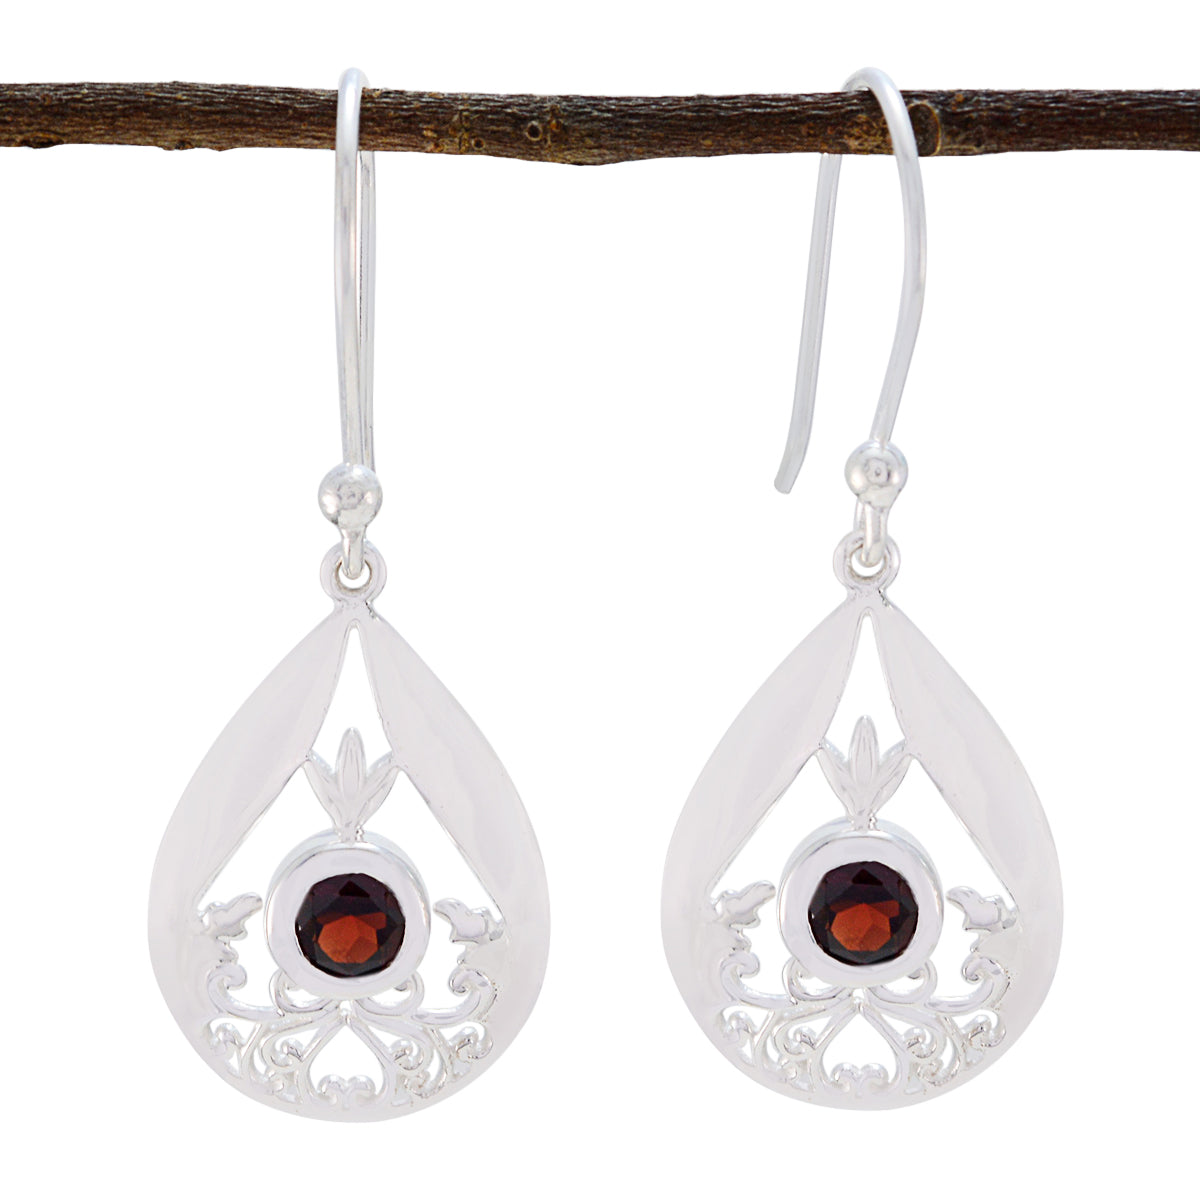 Riyo Real Gemstones round Faceted Red Garnet Silver Earring gift for boxing day